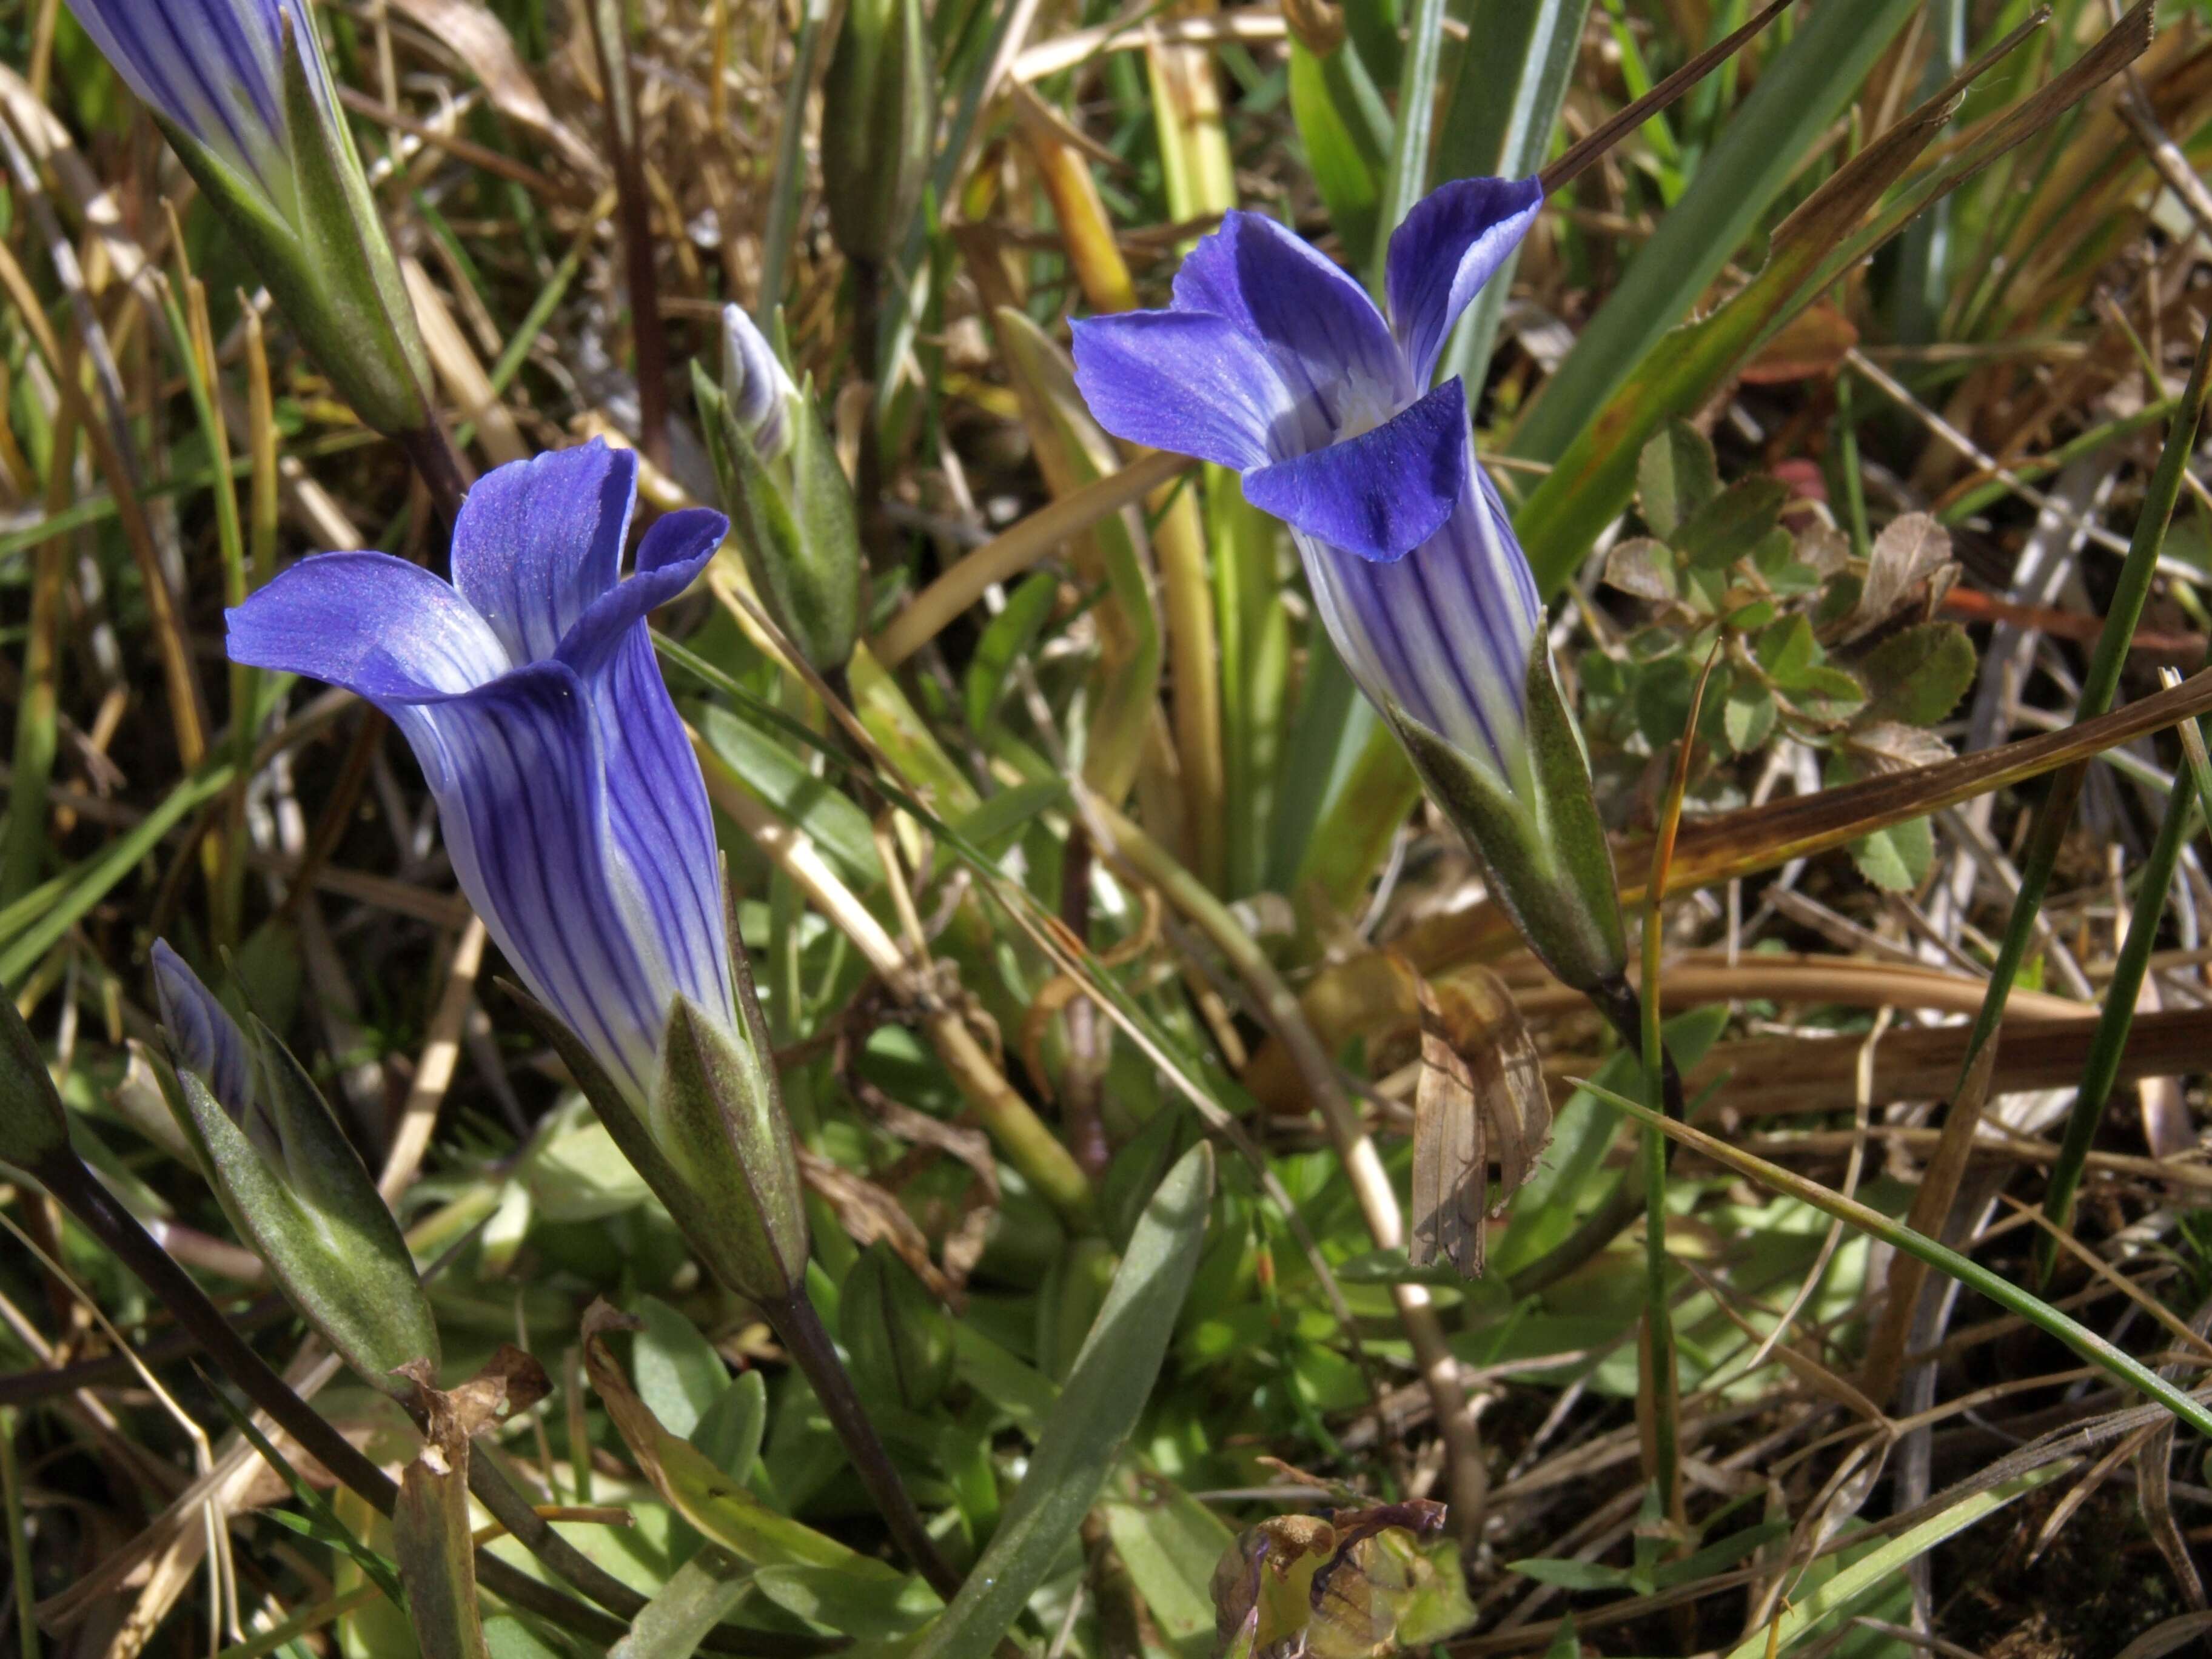 Image of fringed gentian